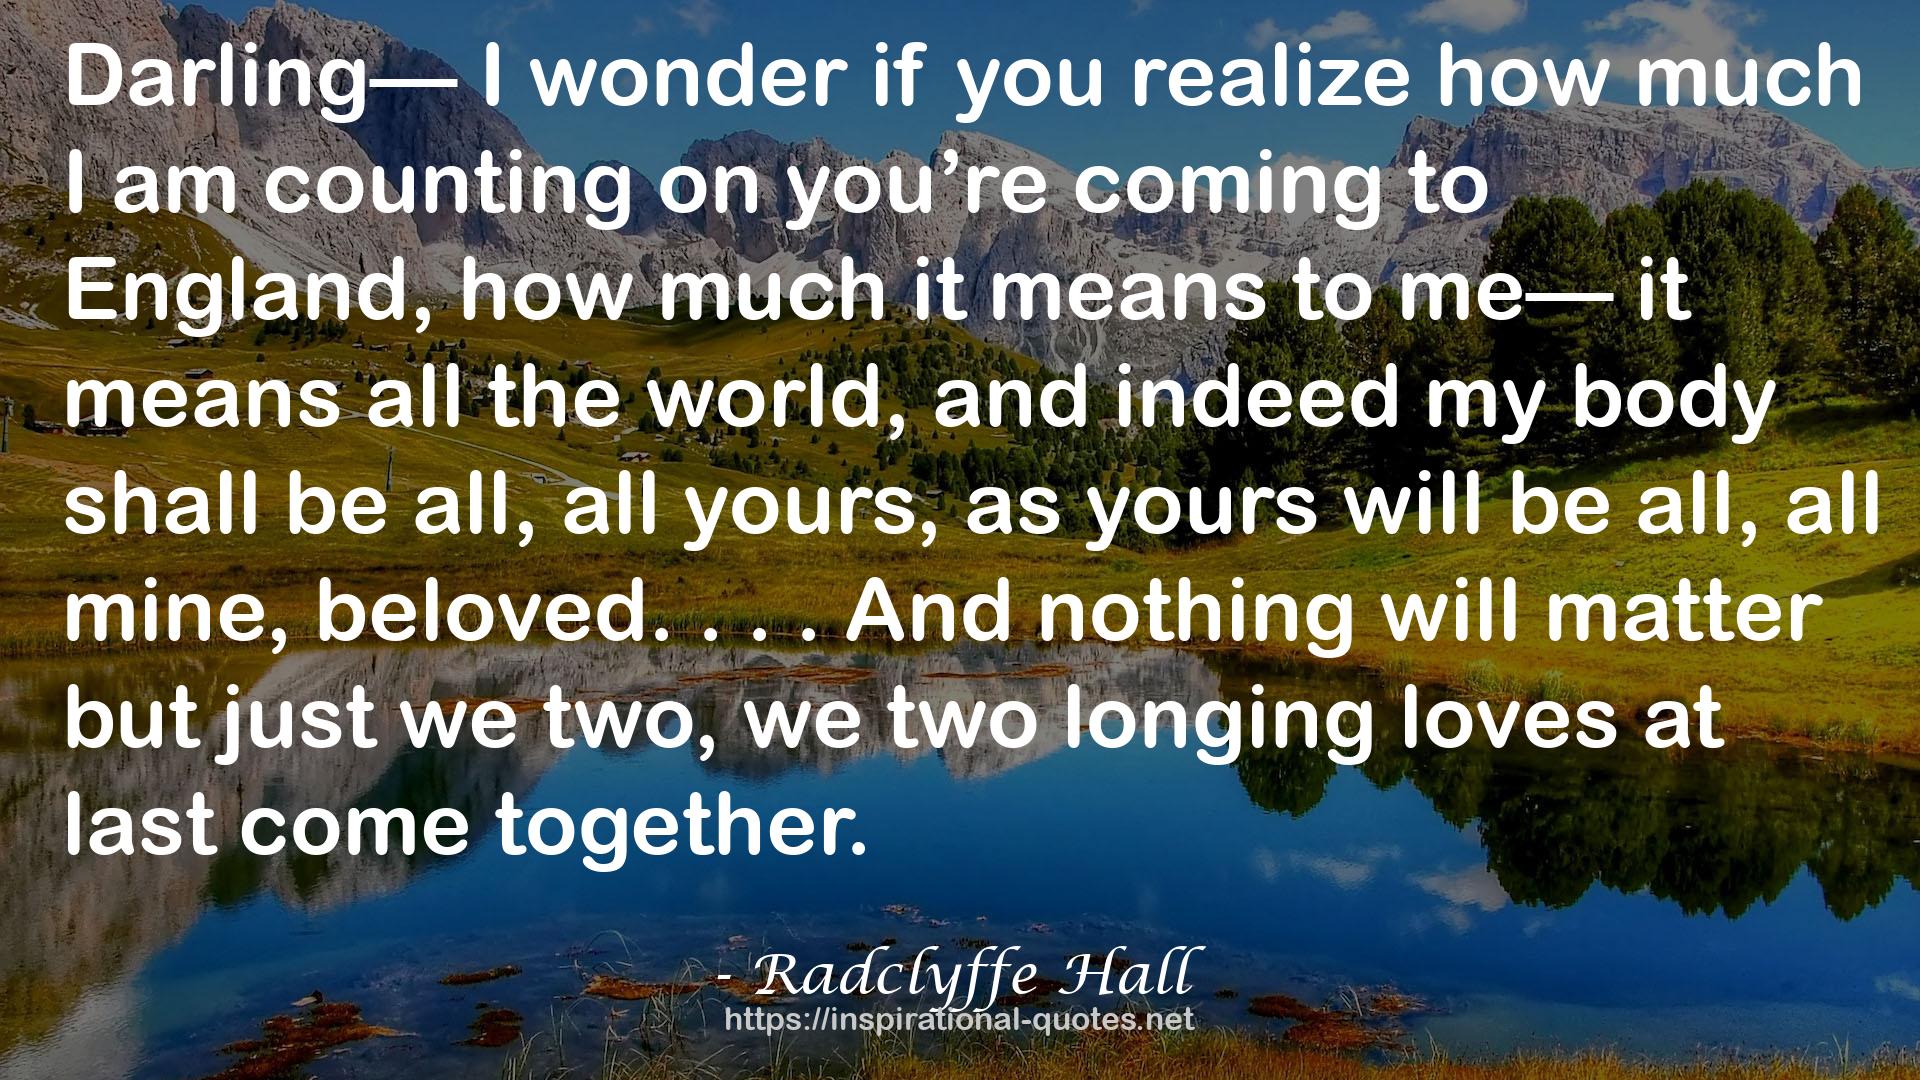 Radclyffe Hall QUOTES